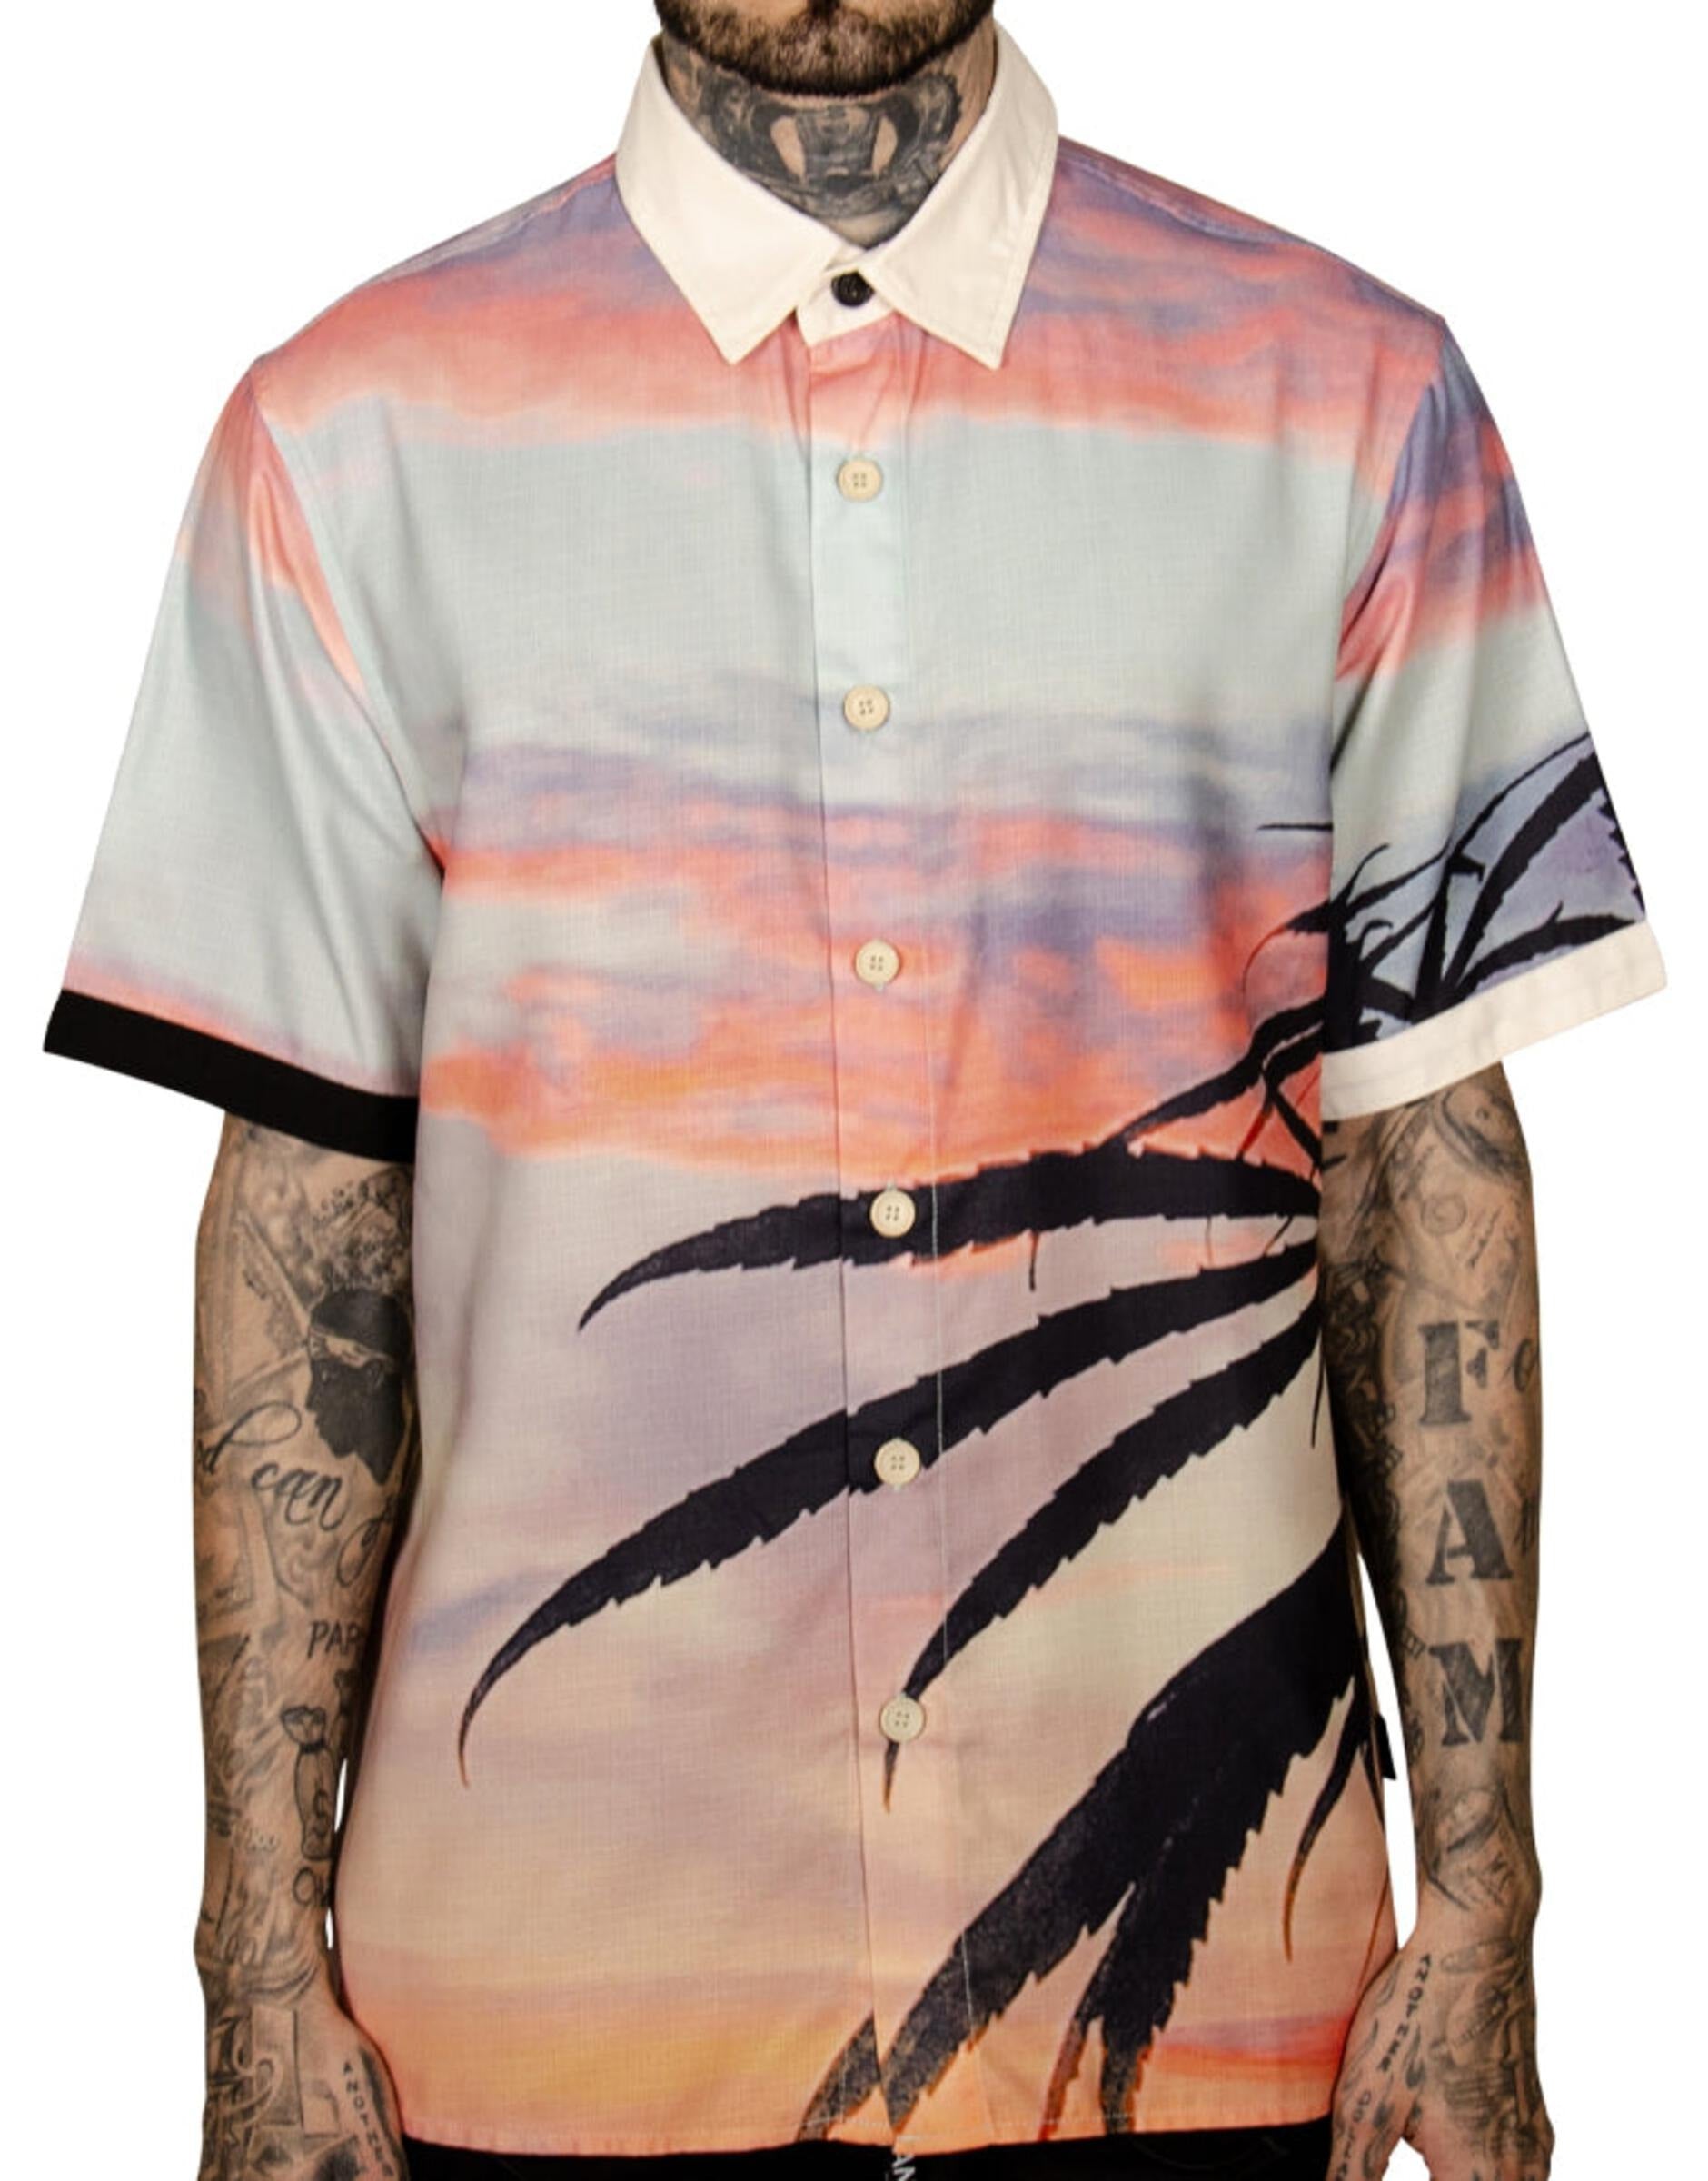 Men, Boys, Teens, Gifts, Wmns, Girls, Urban, Style, Fashion, Mens Tees, Womens Tees, Teen Tees, Boys Tees, Urban Apparel, Button Up Tee, In the Clouds Button Up Shirt, Sunset, The Hideout Clothing, 